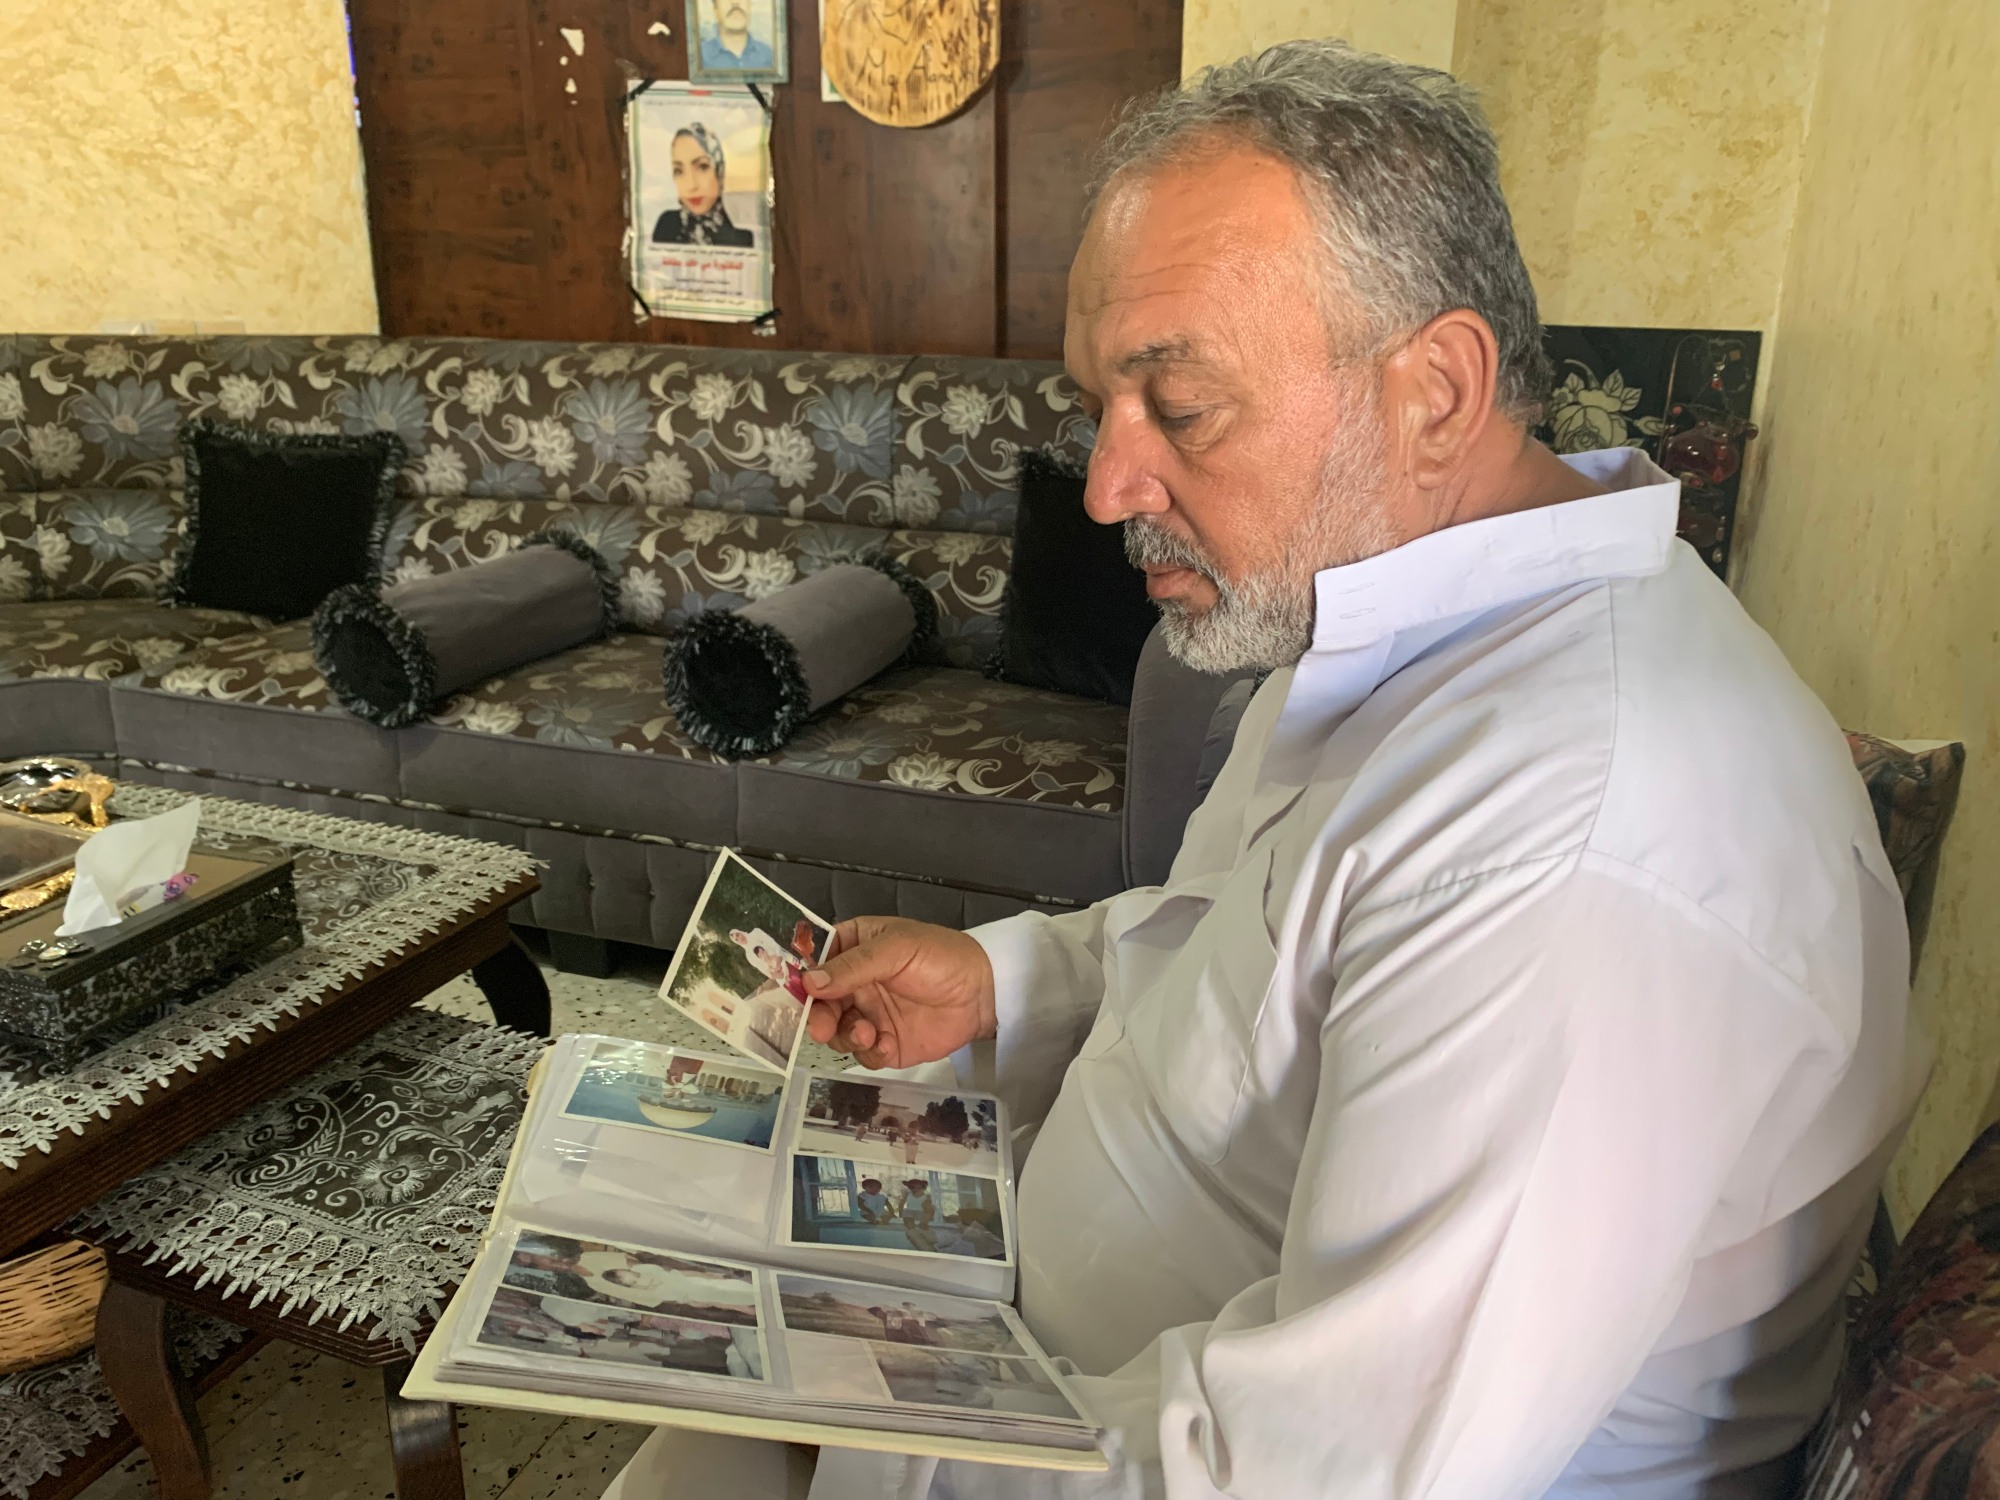 Khaled Afana looks through photographs of his daughter Mai in the family home in Abu Dis, near Jerusalem (MEE/Shatha Hammad)